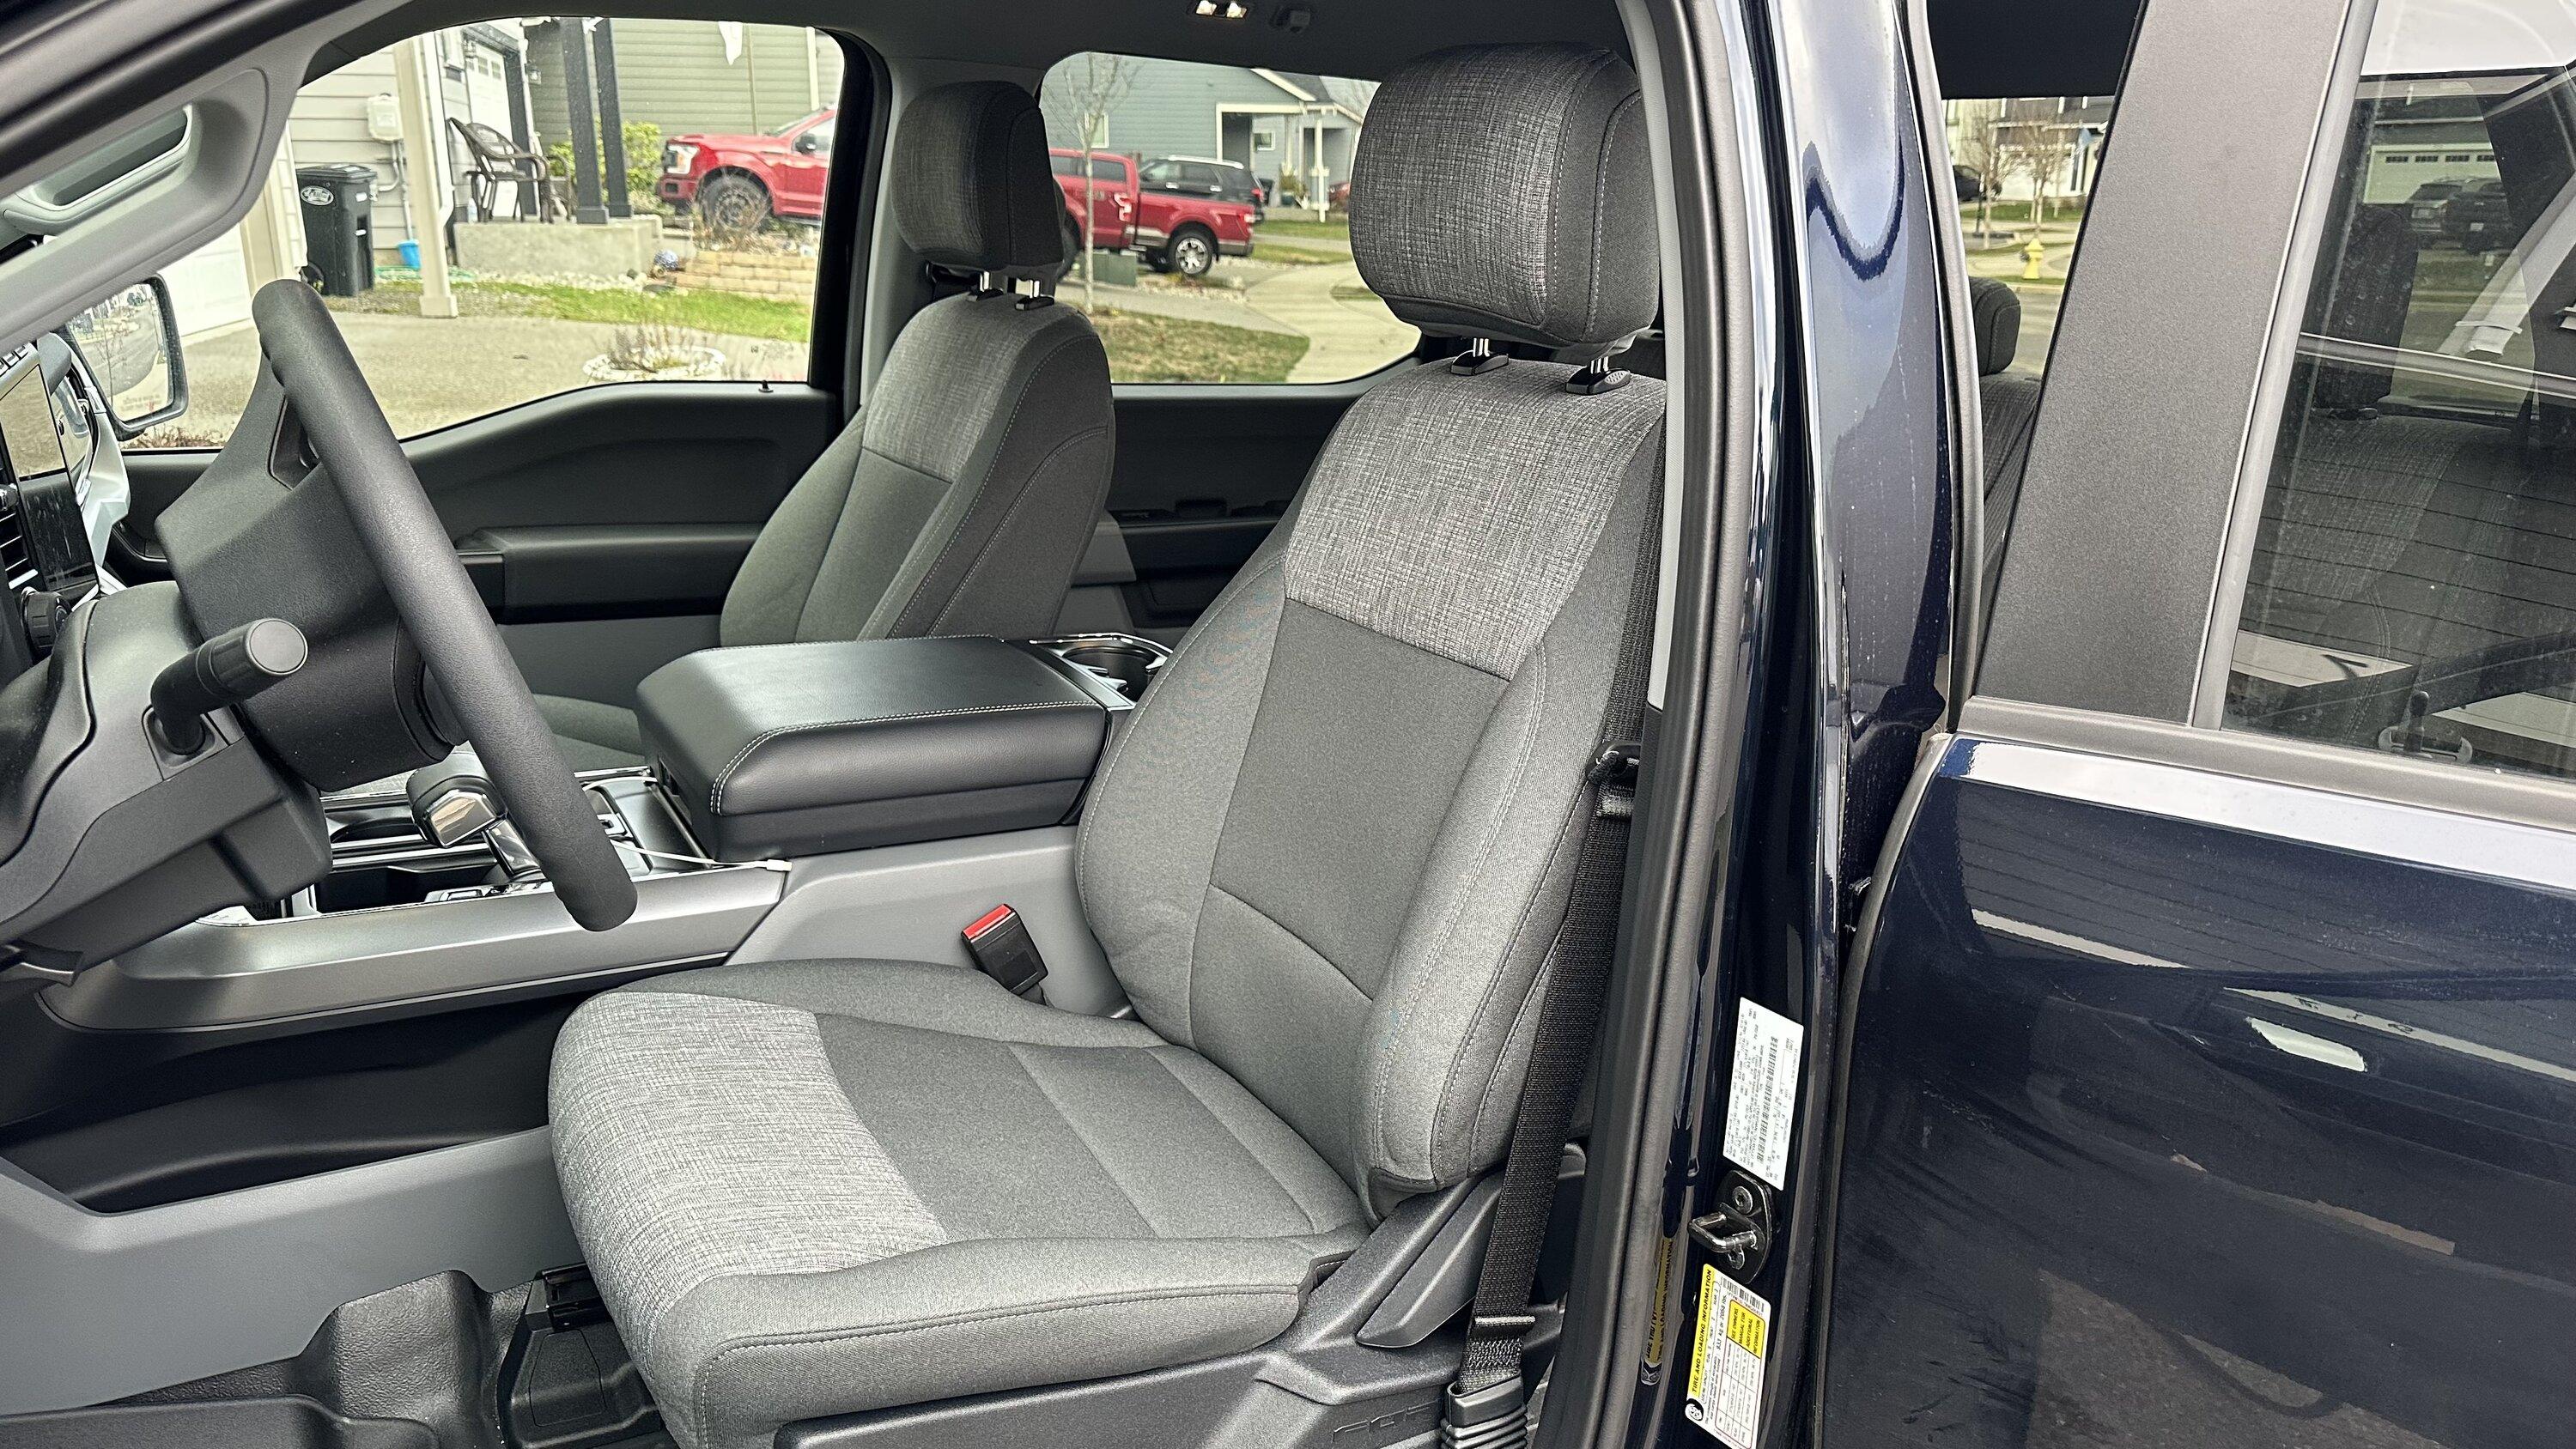 Ford F-150 Lightning Changed Pro Seats to XLT Seats by changing OEM seat covers IMG-5727